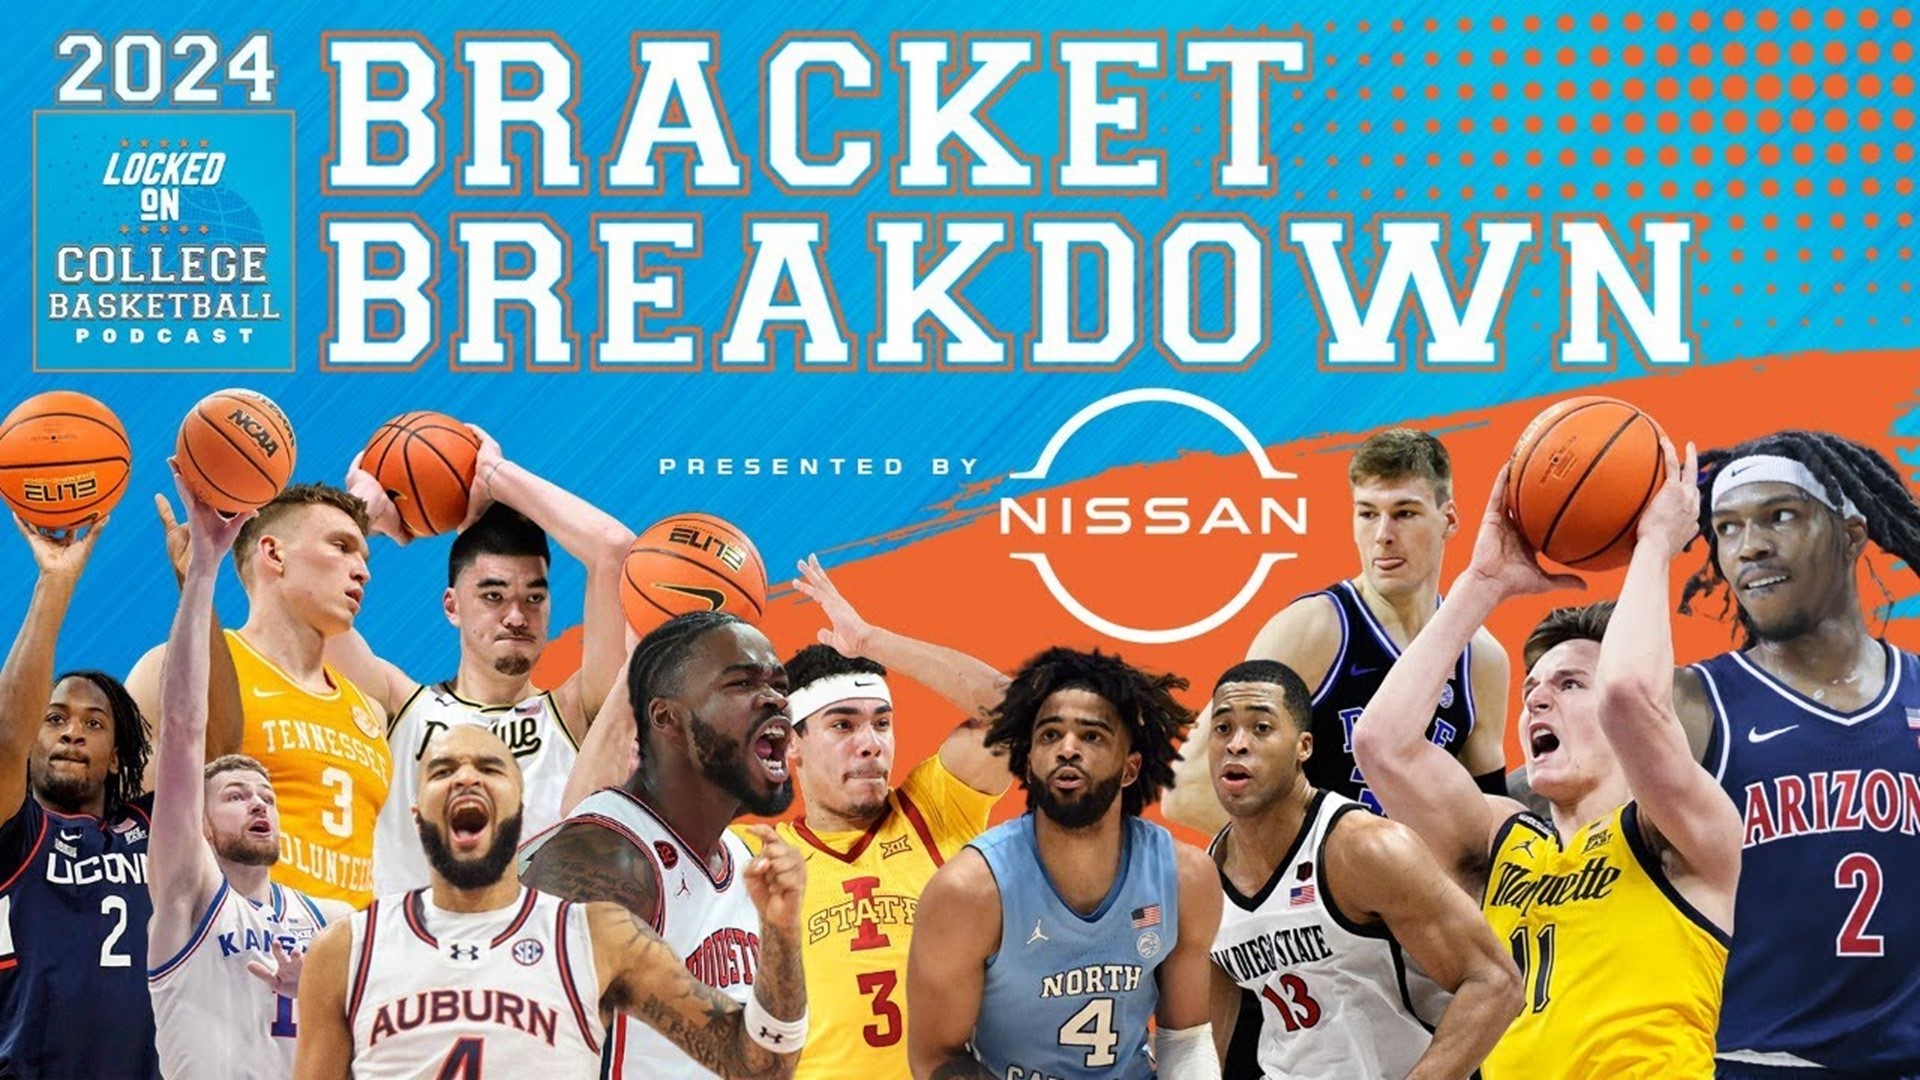 Will UConn, Houston, Purdue and North Carolina hold true to their number one seed in the NCAA Tournament?